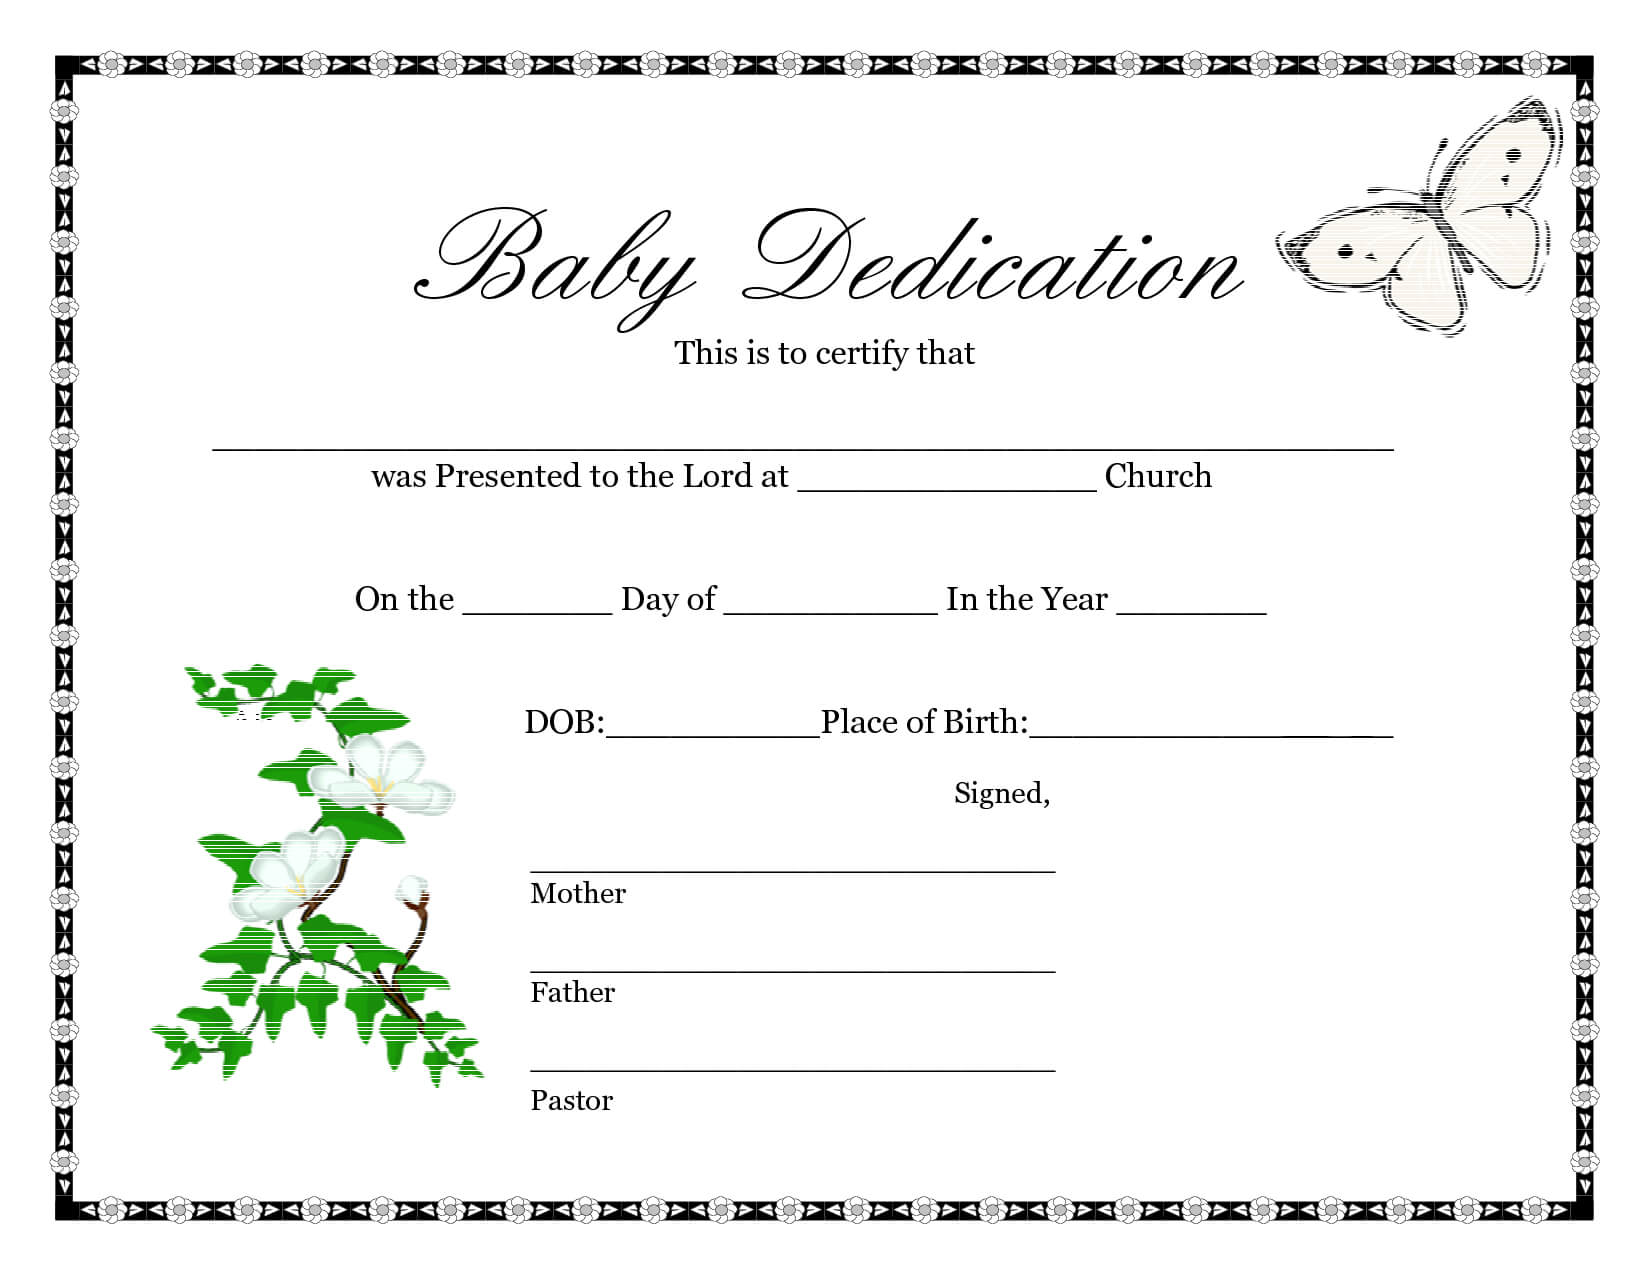 Downloadable Blank Birth Certificate Template Sample : V M D Throughout Birth Certificate Templates For Word